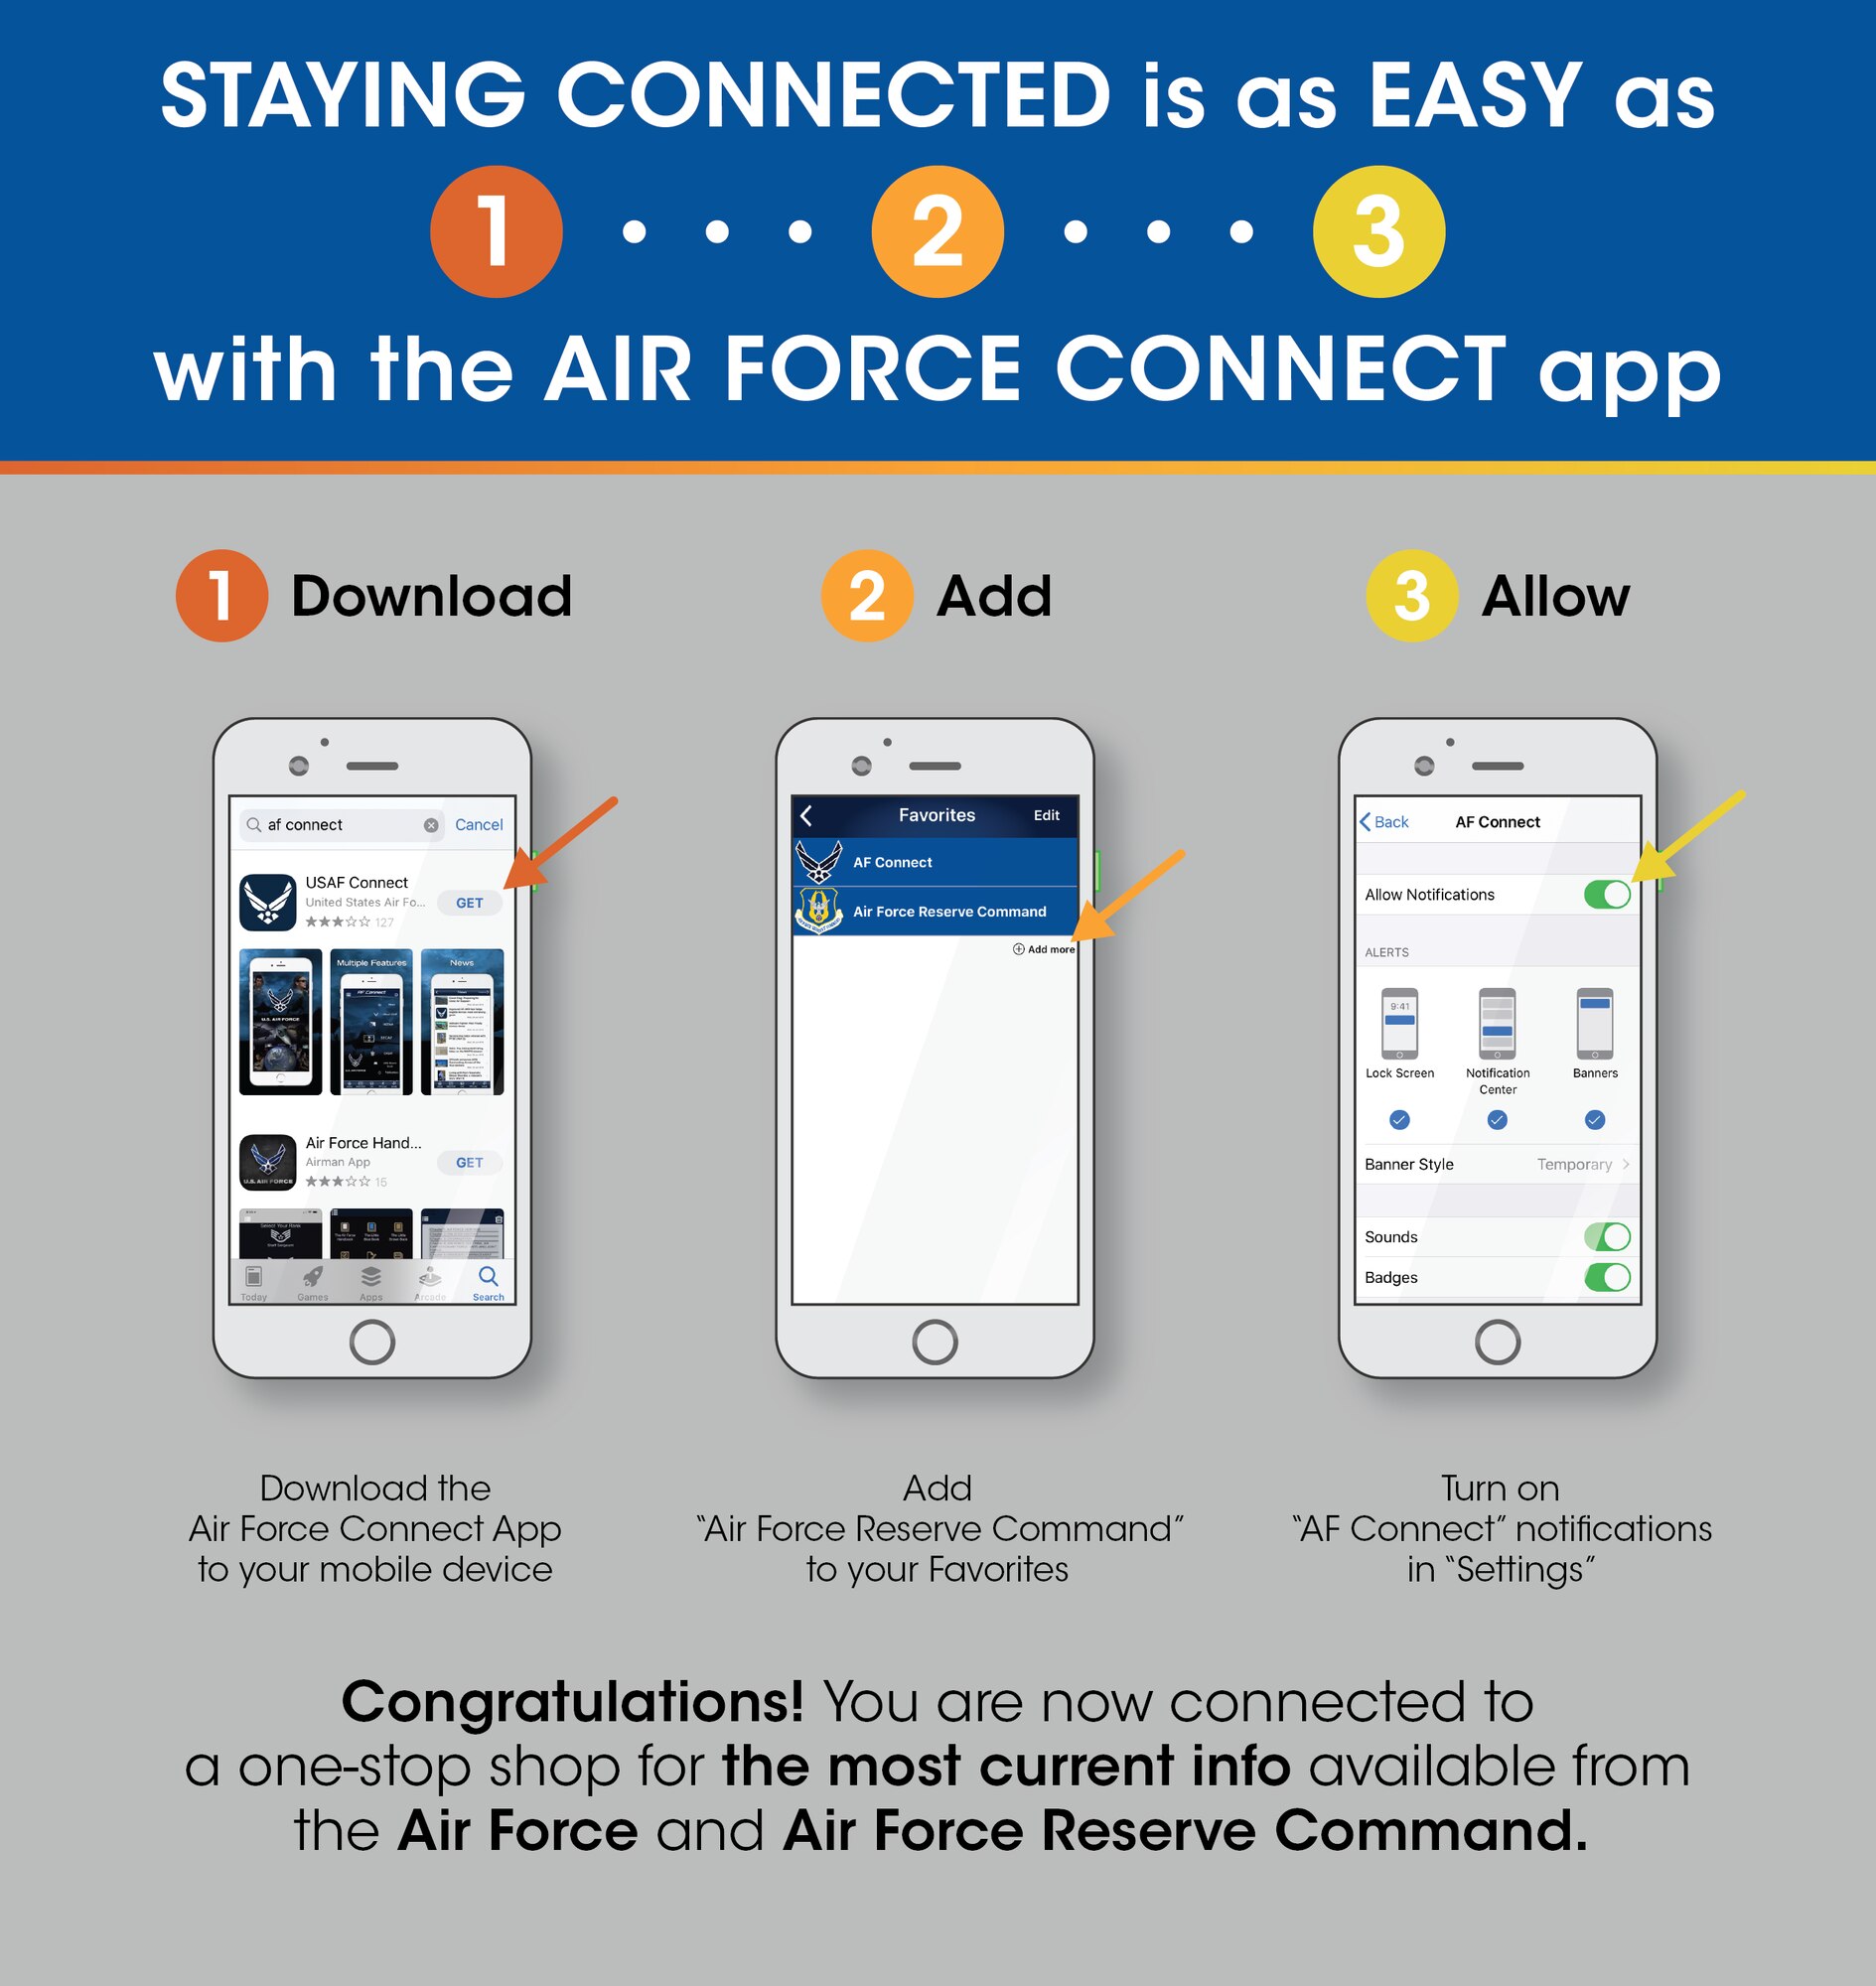 Graphic describing the process to download the Air Force Connect App, how to add the Air Force Reserve Command to the app's favorites, and how to turn on notifications.